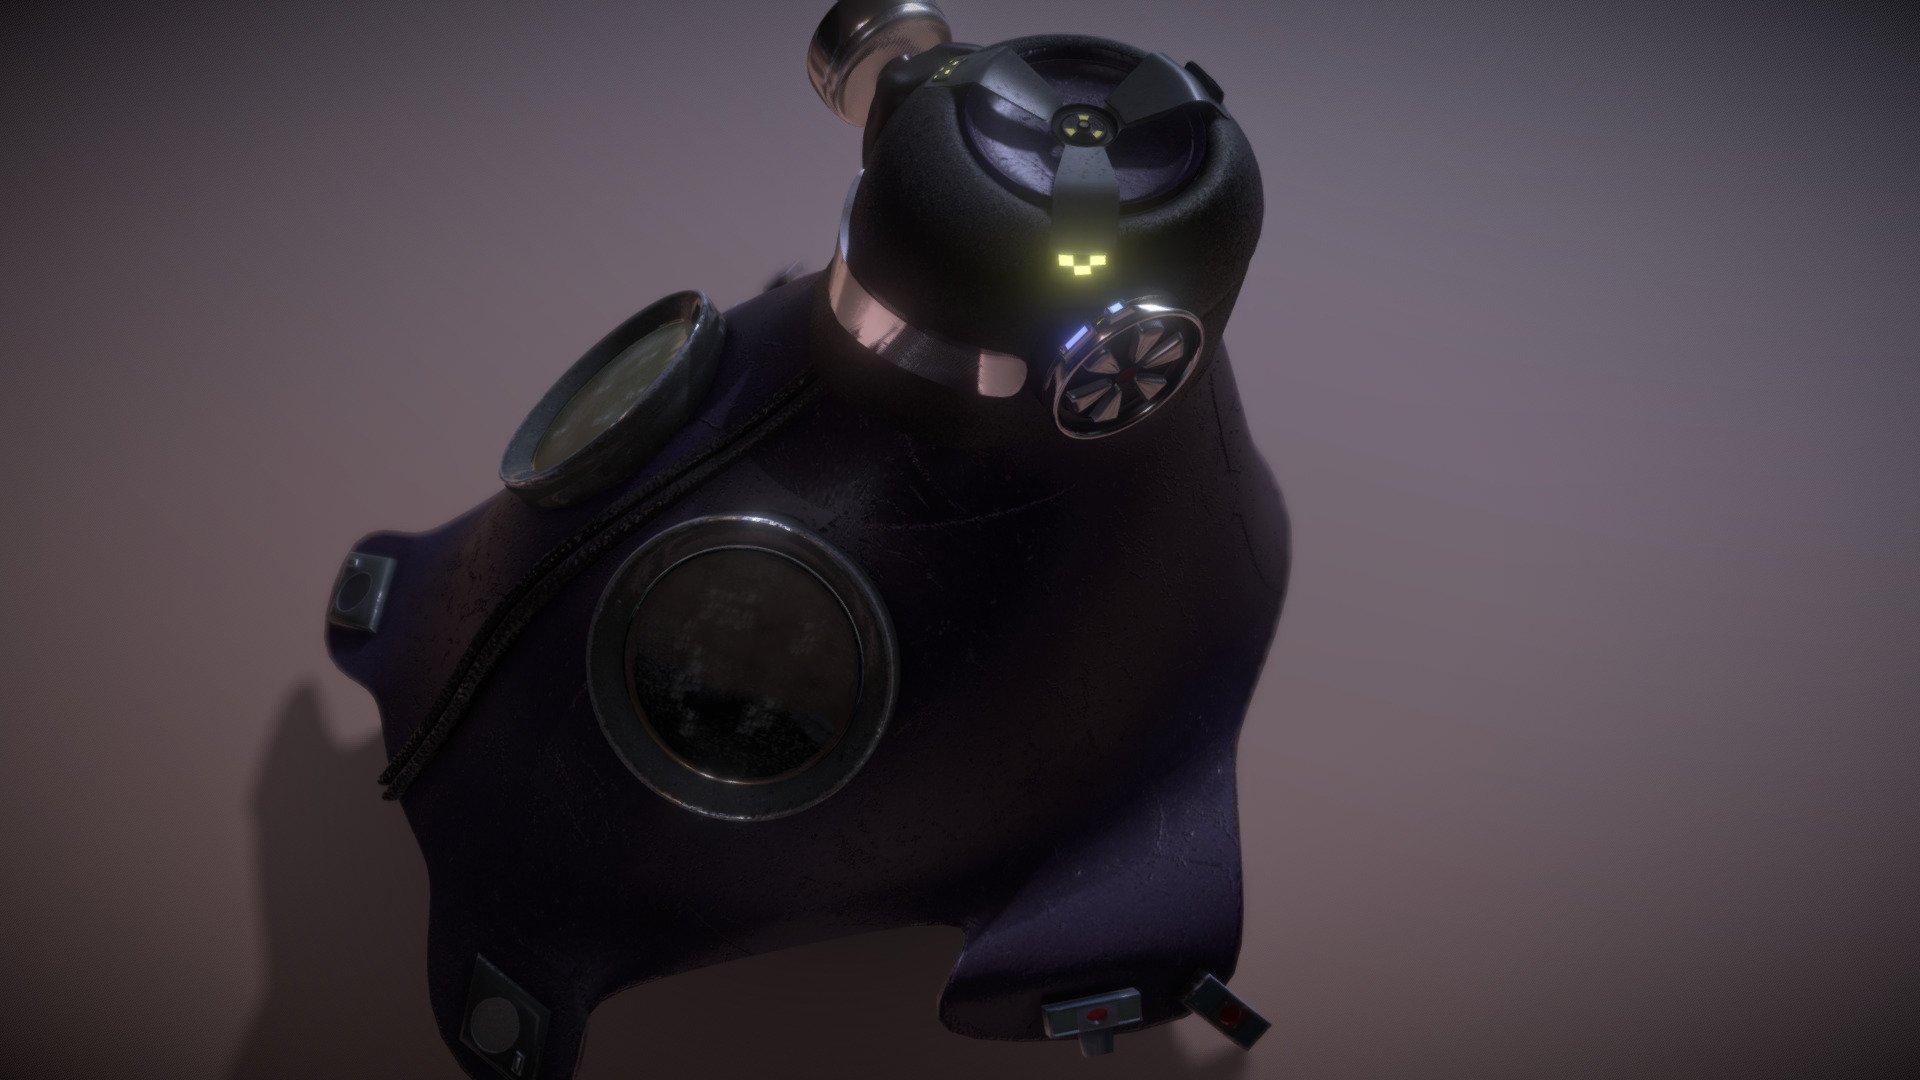 New Gas Mask I modeled  in Blender 2.82.
Textured using Quixel Mixer
This was inspired from the character Kaiman's mask from Dorohedoro Anime.

If you like this model, then support me by following on :


Instagram :
https://www.instagram.com/iam_abhiak49/?hl=en


Twitter:
https://twitter.com/iamAbhiak49


Artstation:
https://abhiak49.artstation.com 


BlendSwap:
https://www.blendswap.com/profile/1119284/blends


Youtube:
https://www.youtube.com/channel/UCQj2IddTb_ltTe8U1DwRKdQ?view_as=subscriber - Gas Mask (Kaiman) - Download Free 3D model by iamAbhiak49 3d model